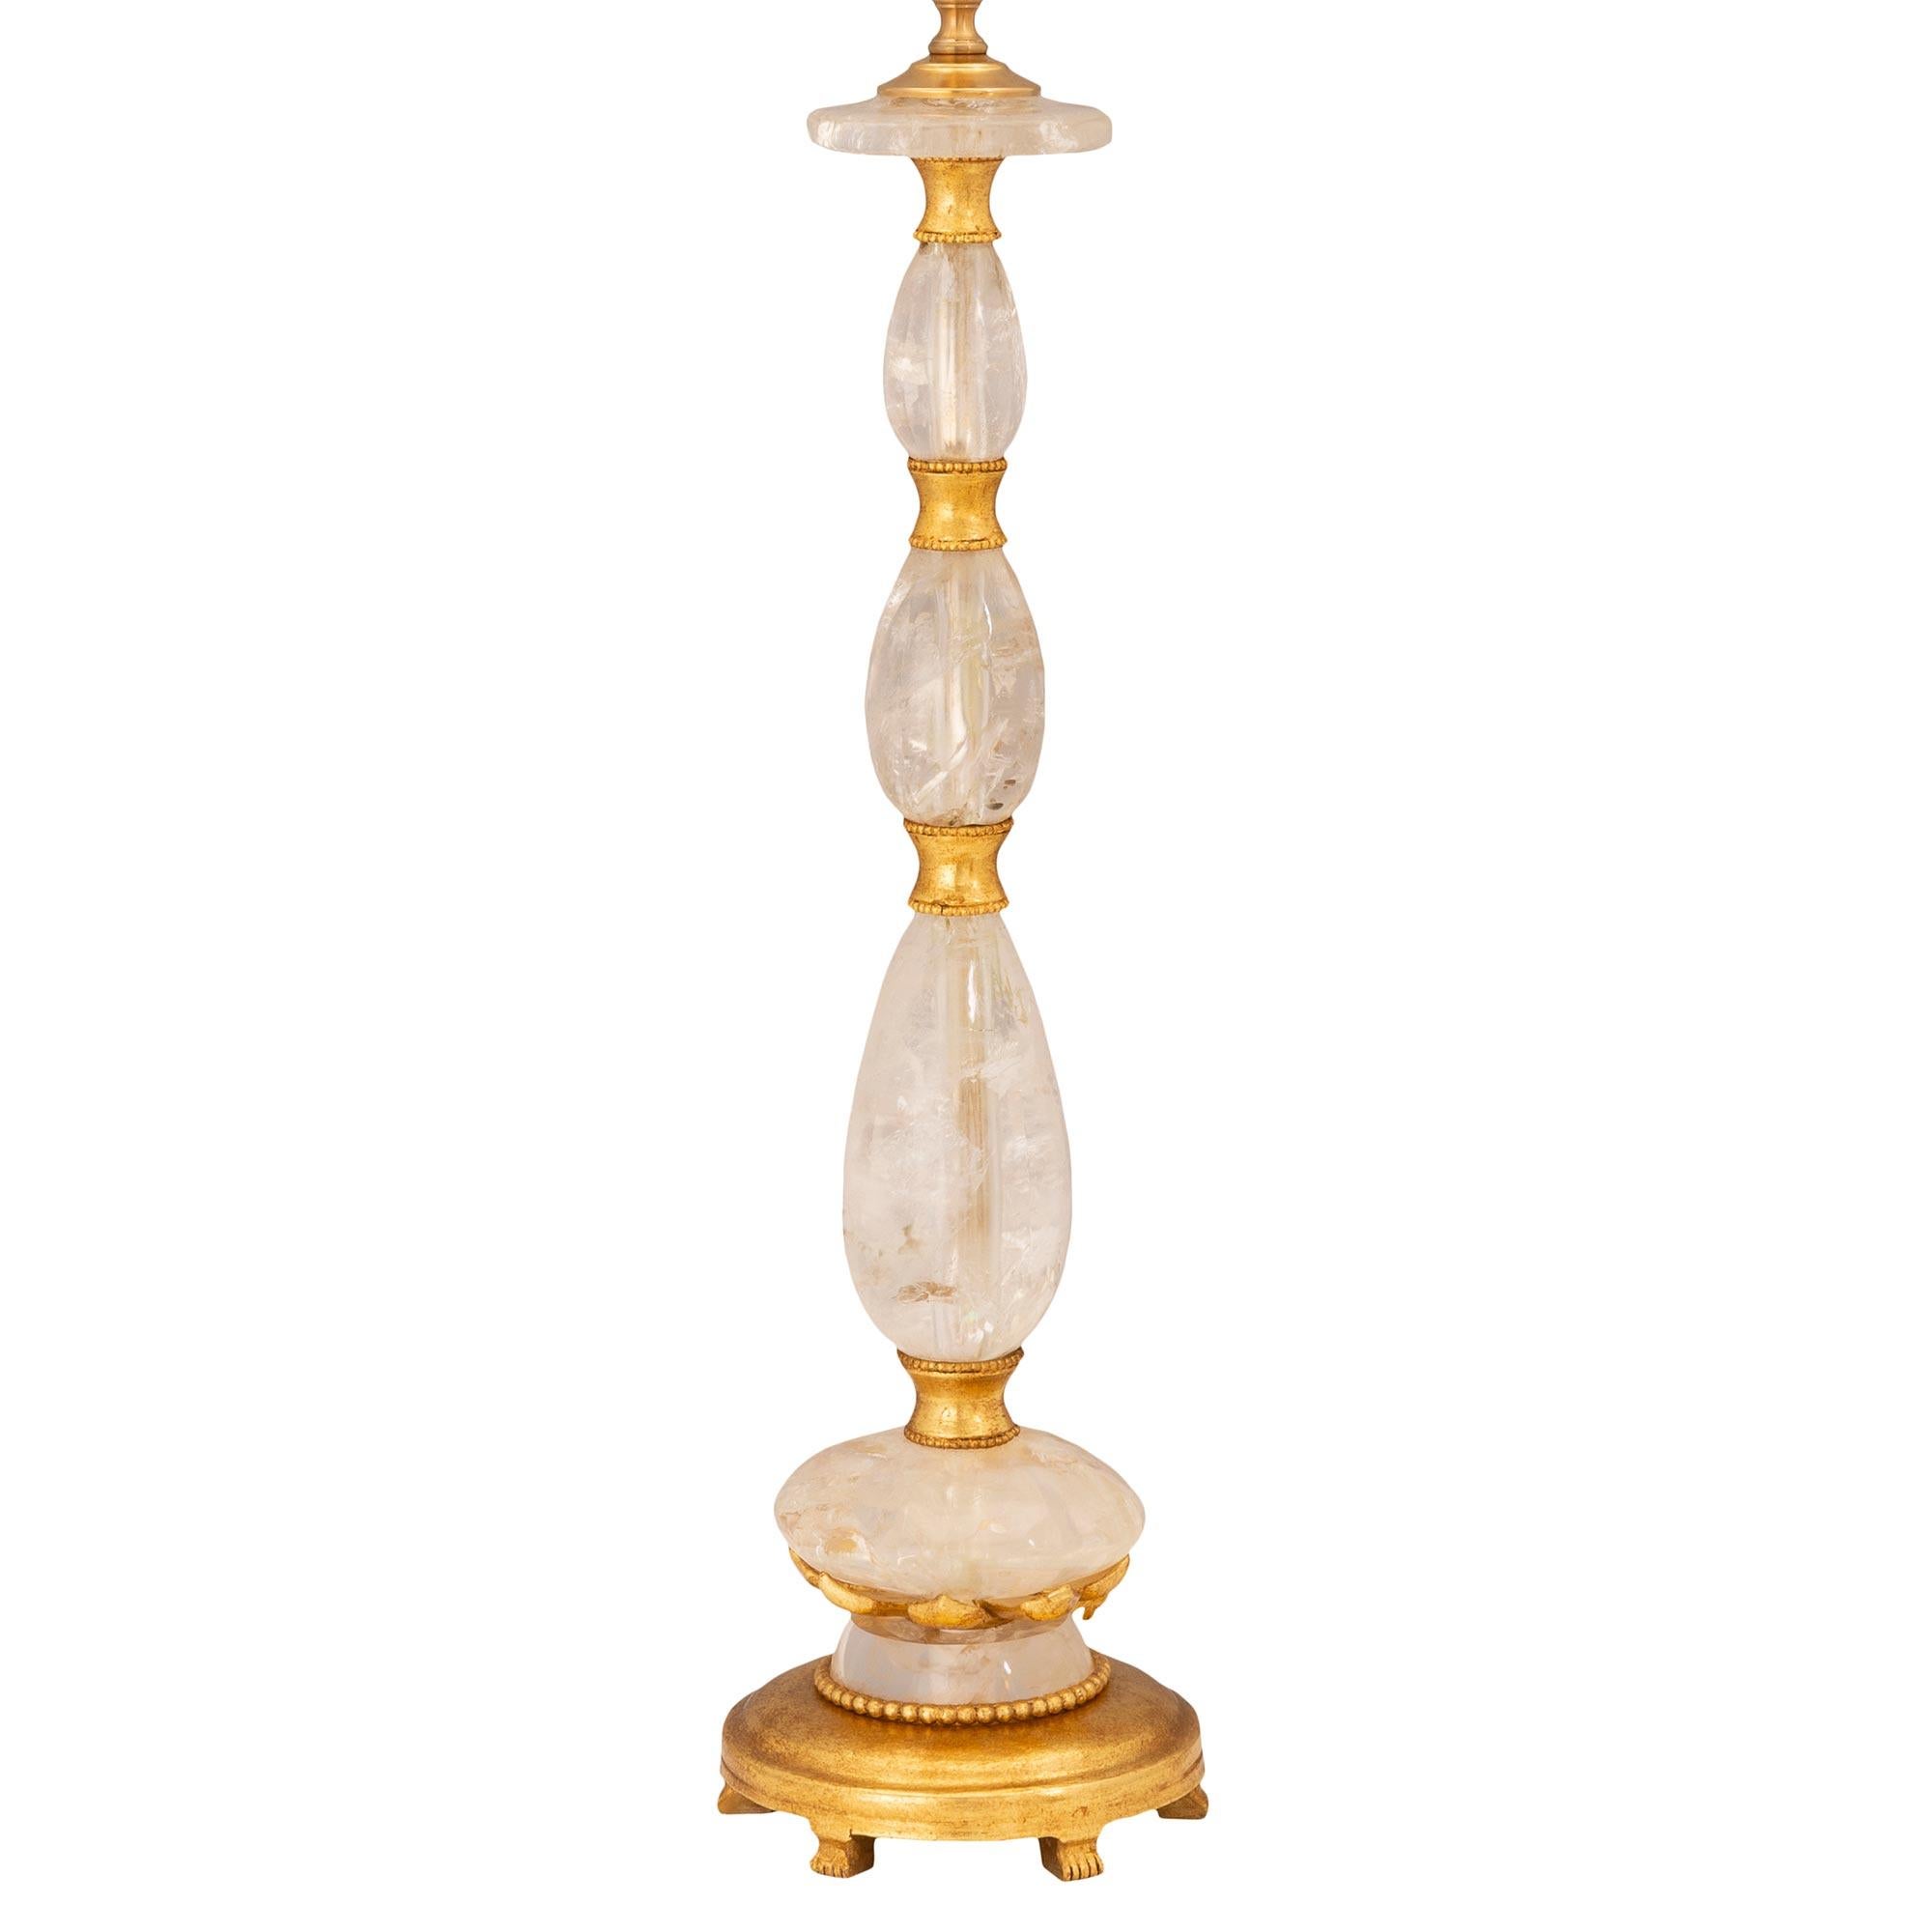 An exceptional French turn of the century Louis XVI st. giltwood, gilt metal, and rock crystal lamp. The lamp is raised by an elegant circular mottled giltwood base with six unique and most decorative fluted feet and a wrap around beaded band. The